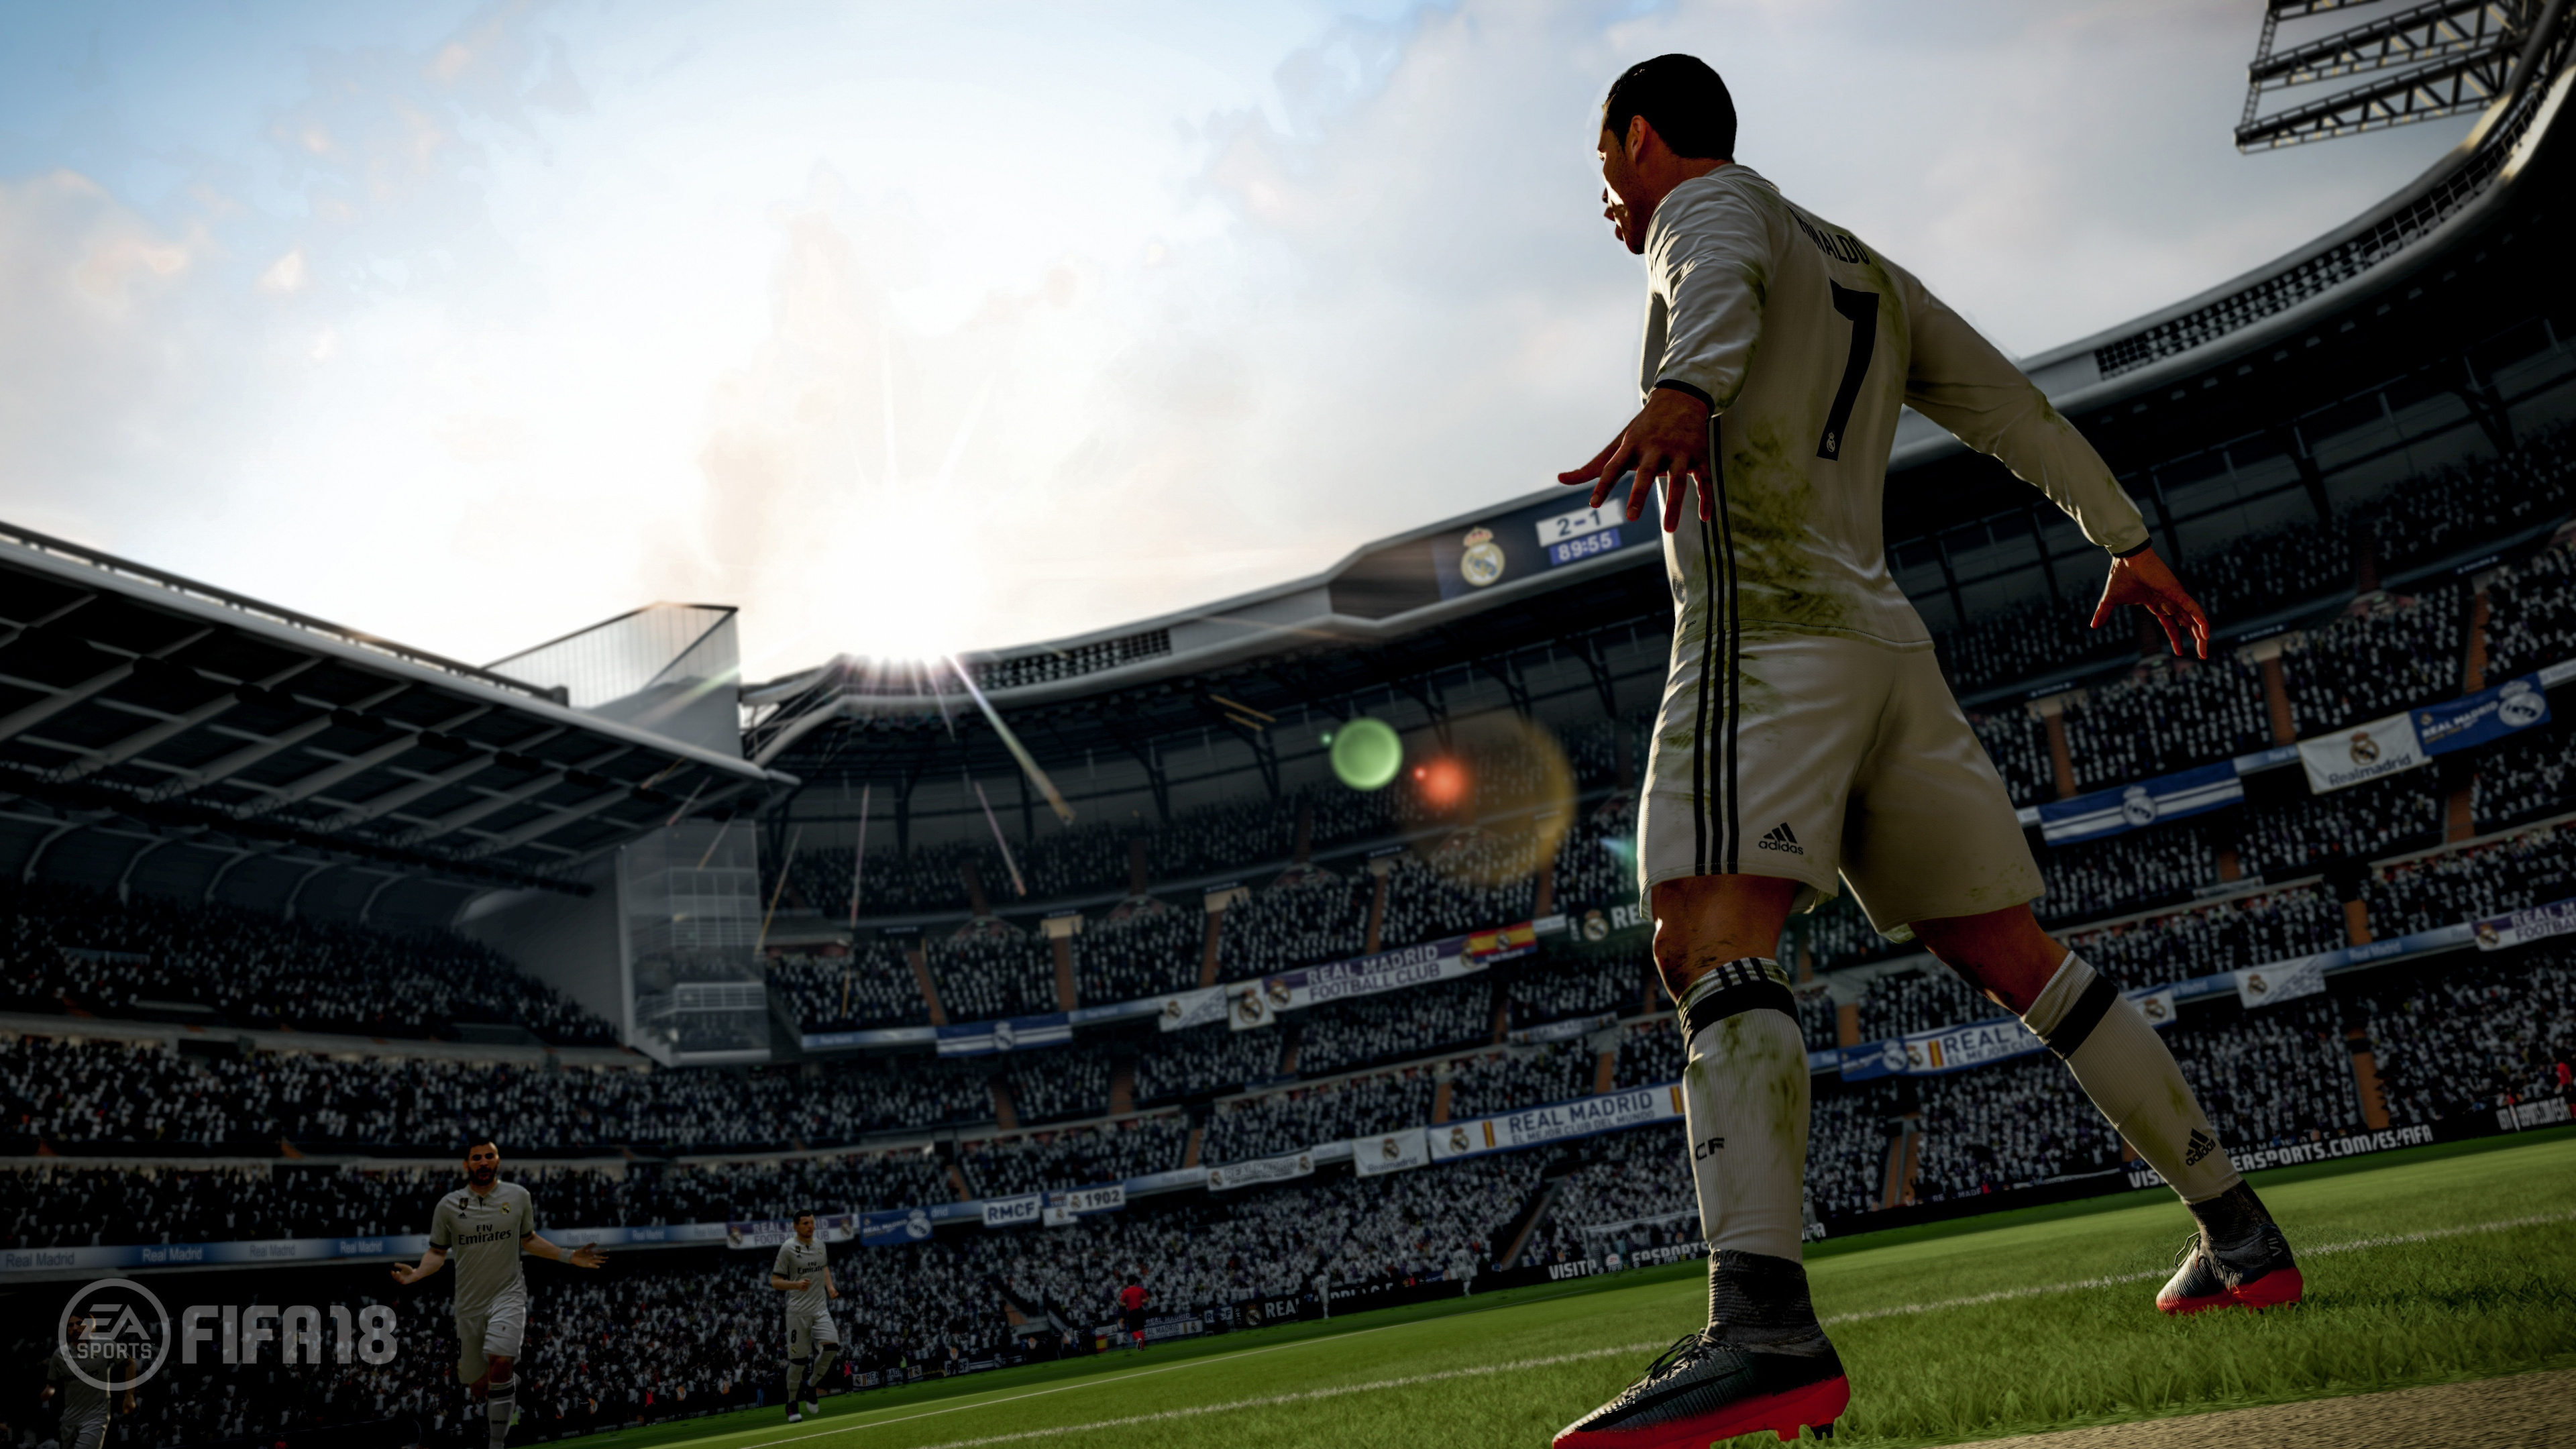 FIFA 18, ea Sports, Electronic Arts, Sports Venue, Stadion. Wallpaper in 3840x2160 Resolution